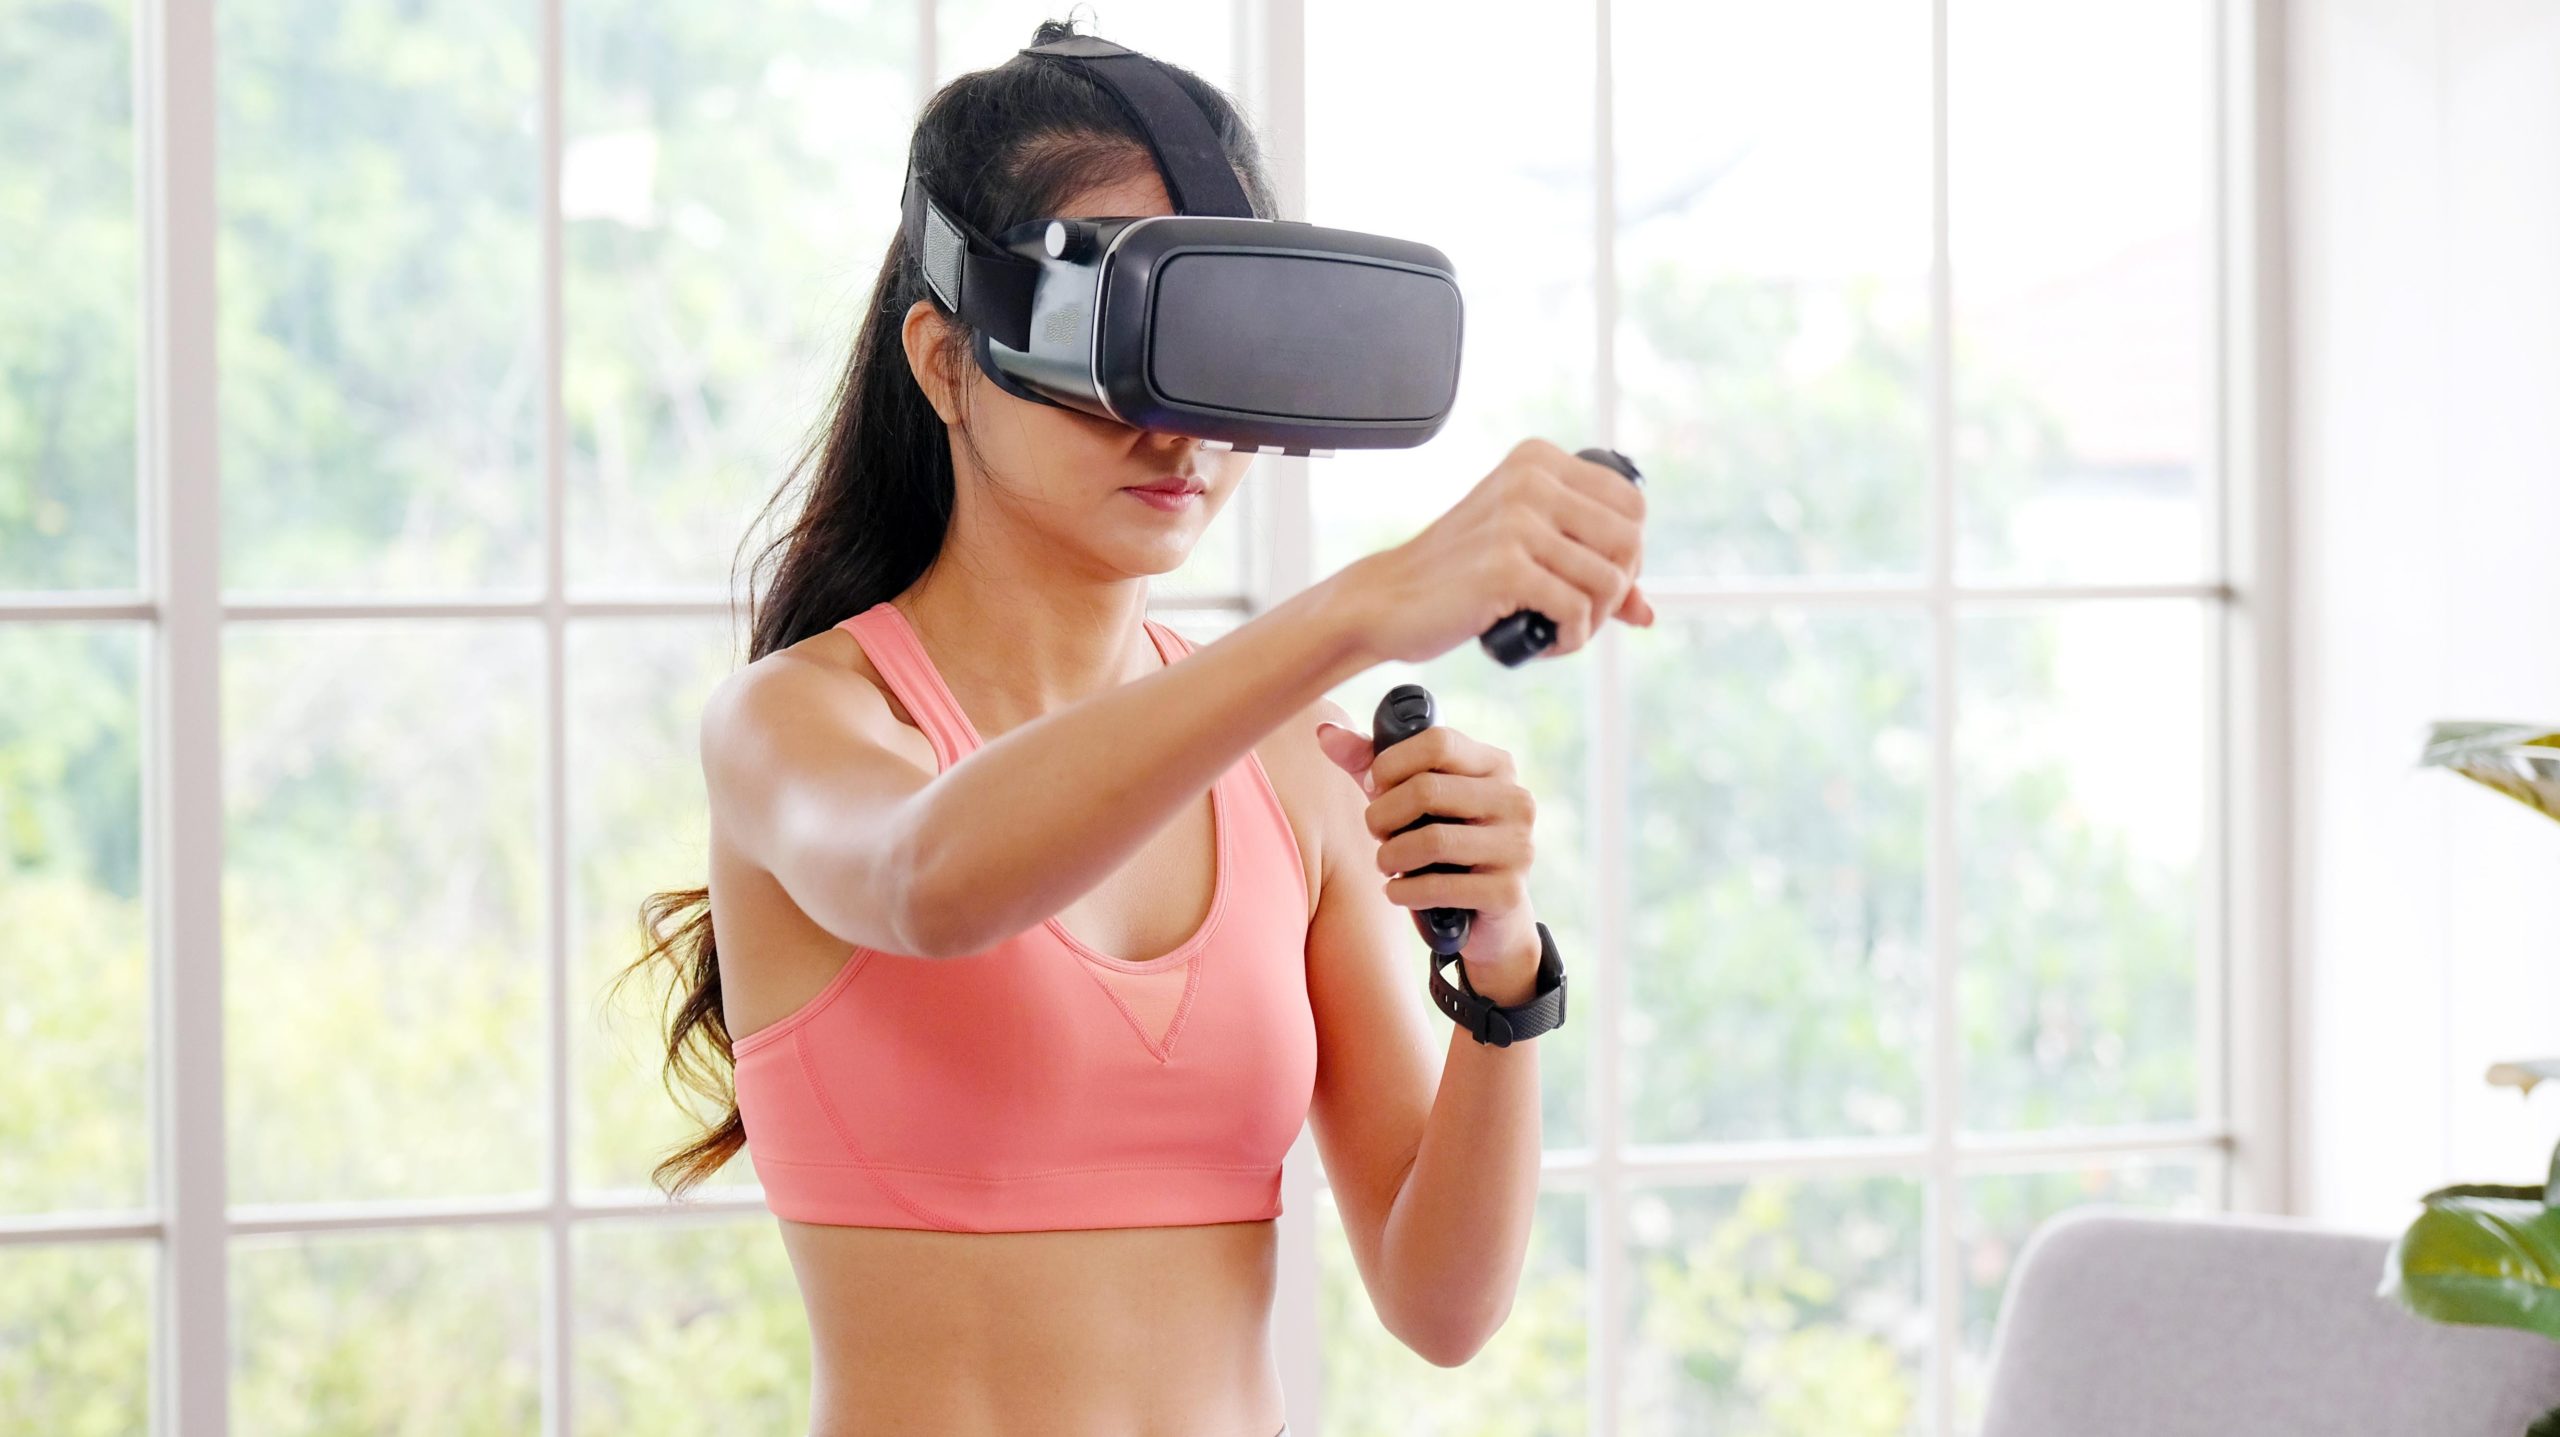 What I’ve Learned About Working Out in VR